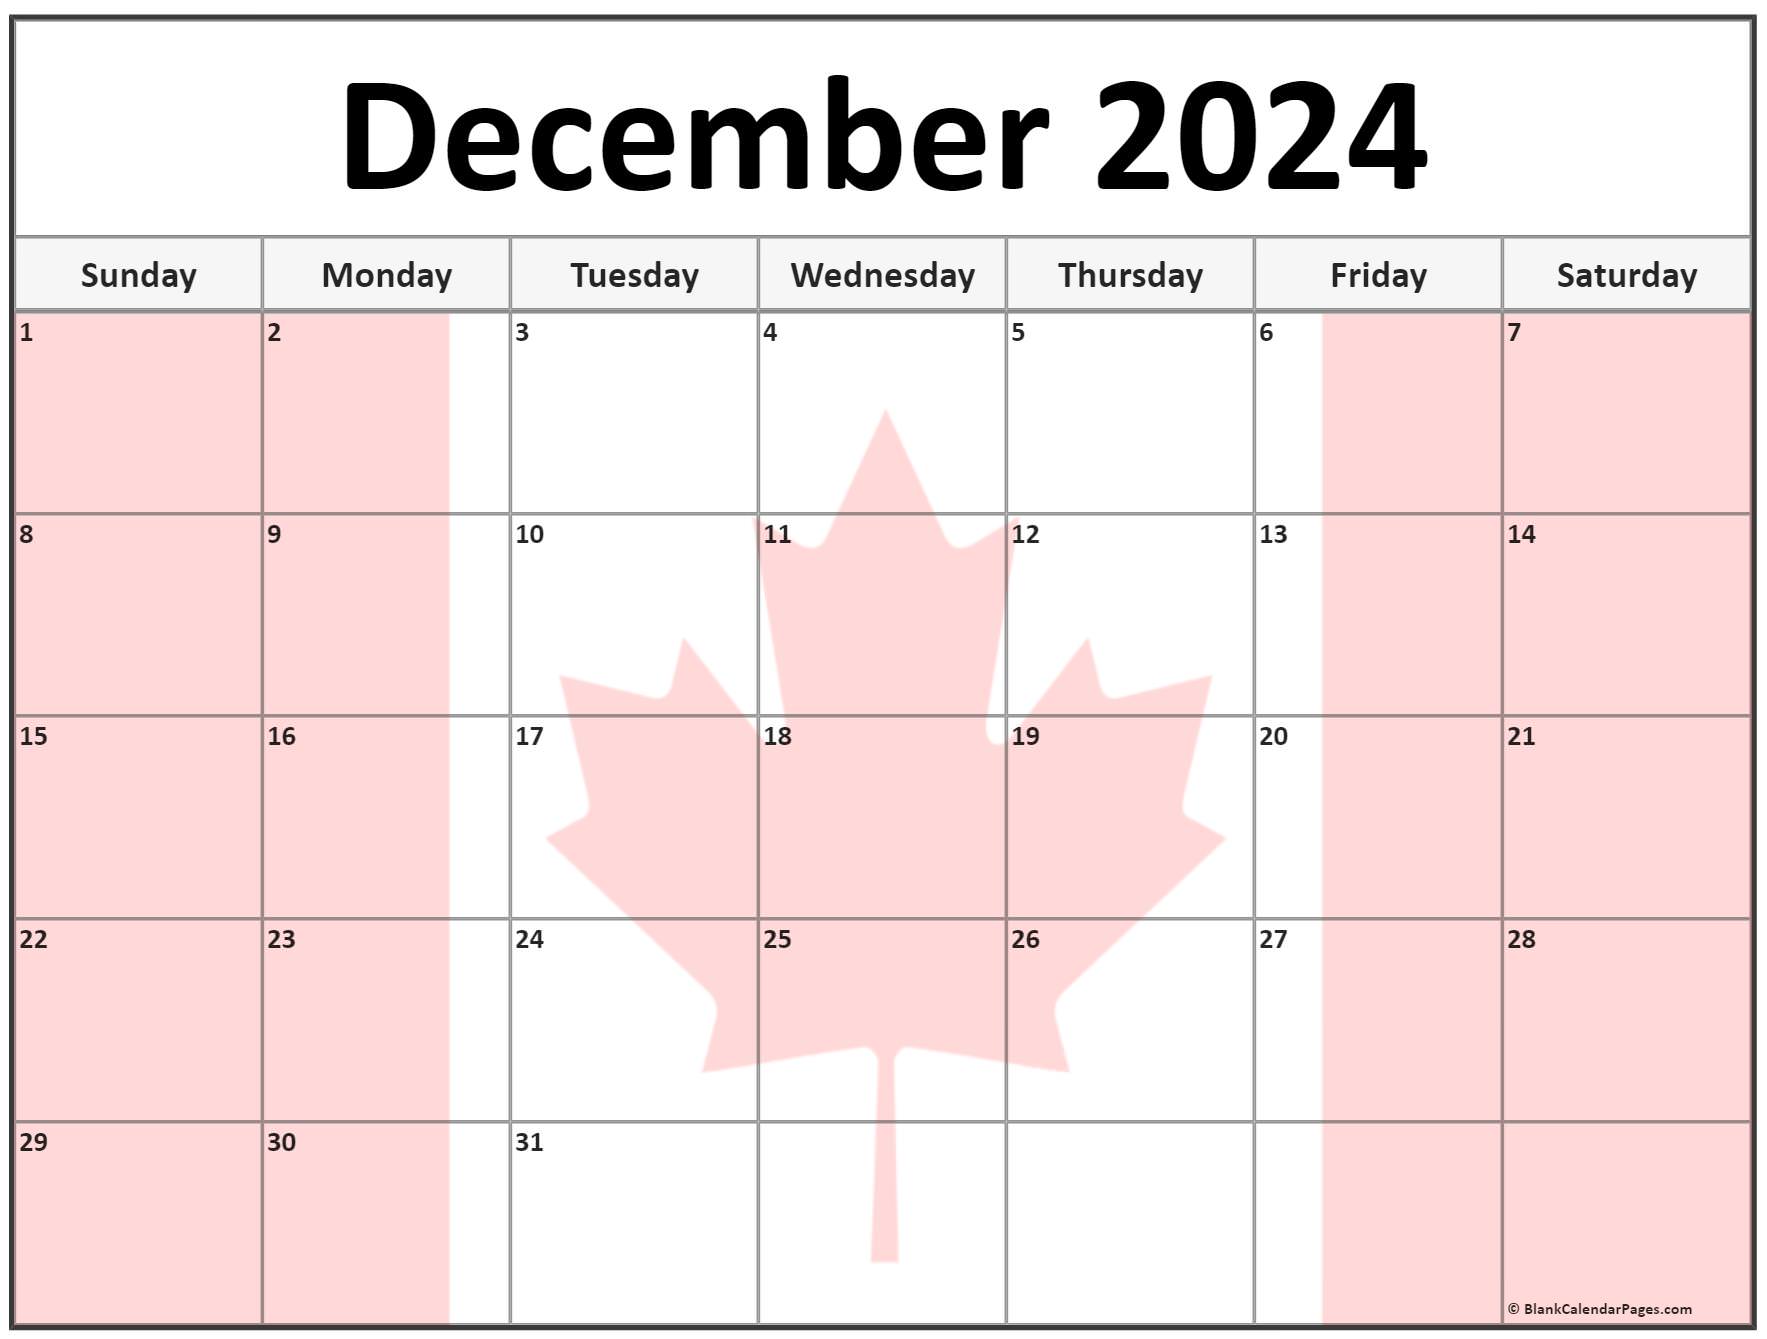 collection-of-december-2022-photo-calendars-with-image-filters